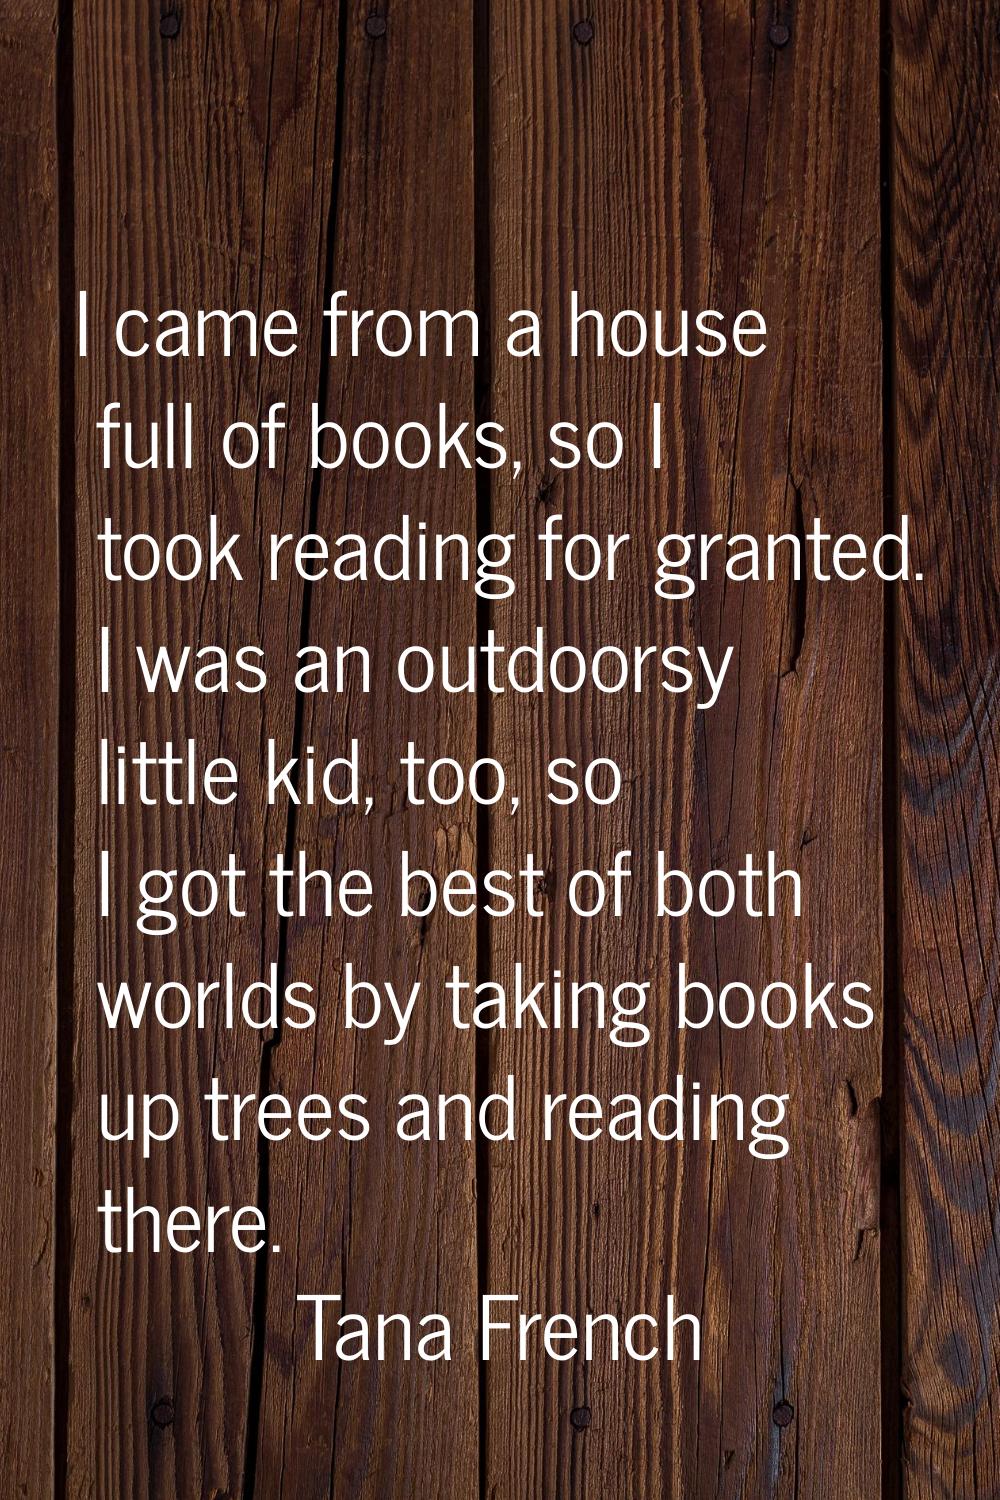 I came from a house full of books, so I took reading for granted. I was an outdoorsy little kid, to